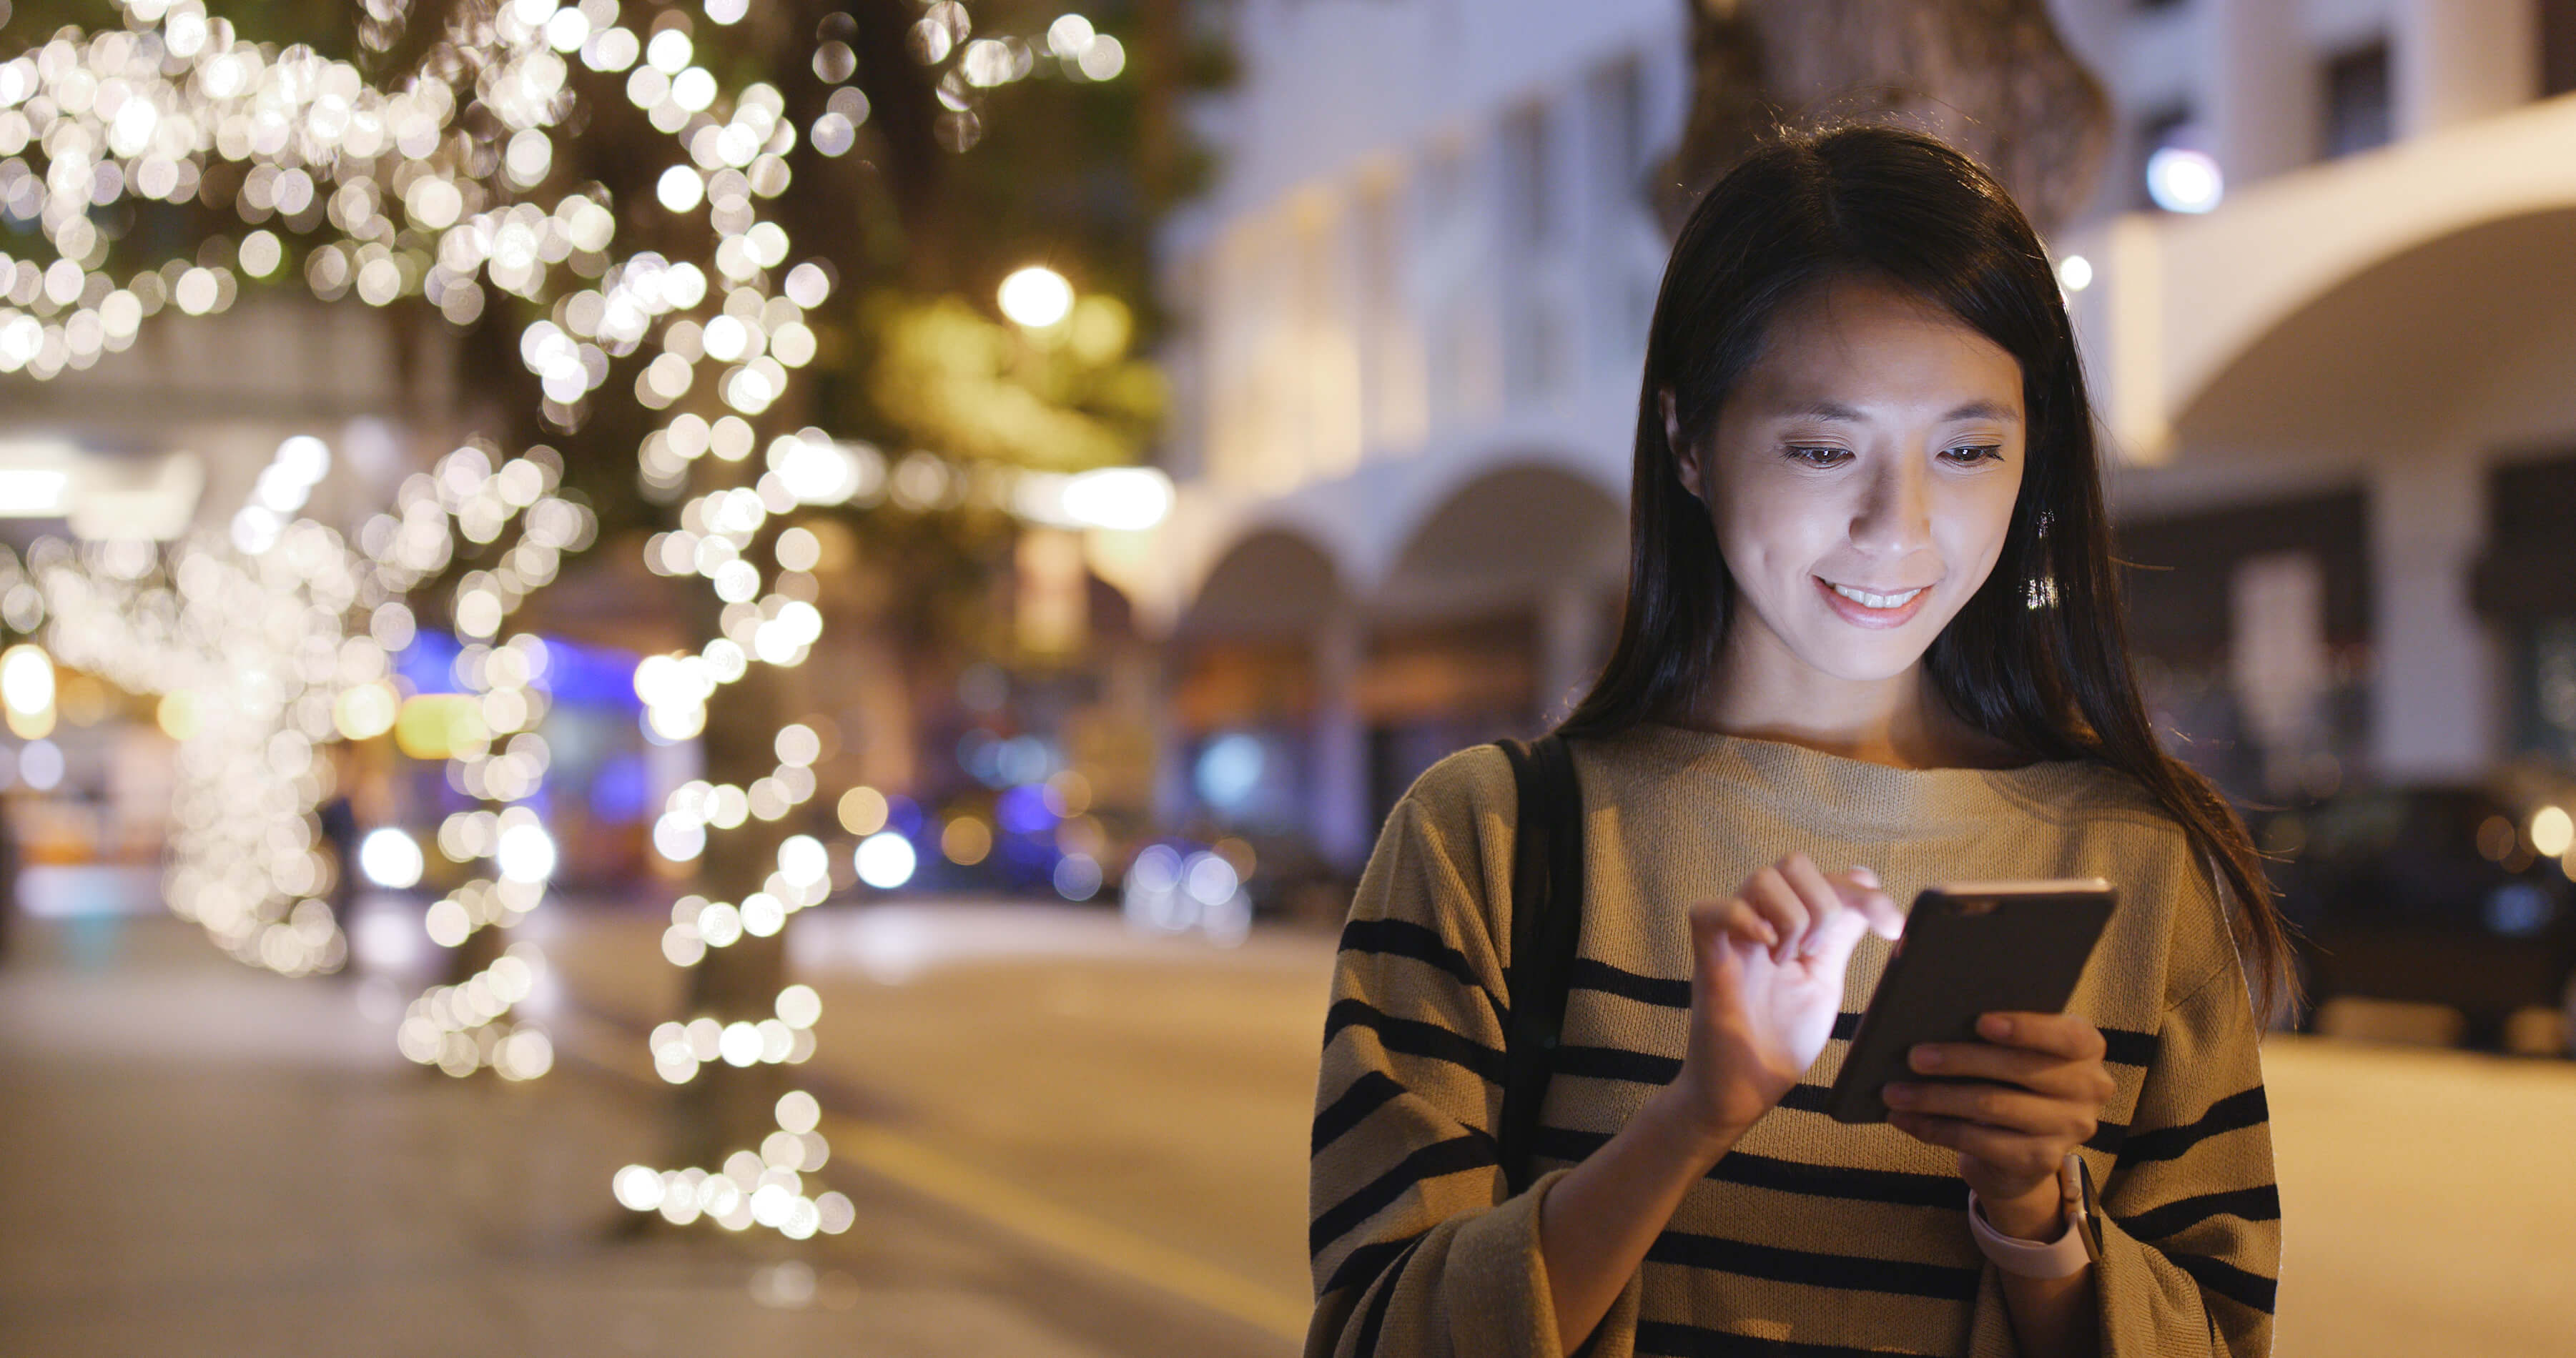 Southeast Asians shoppers get most excited about Christmas according to a new study. Source: Shutterstock.com